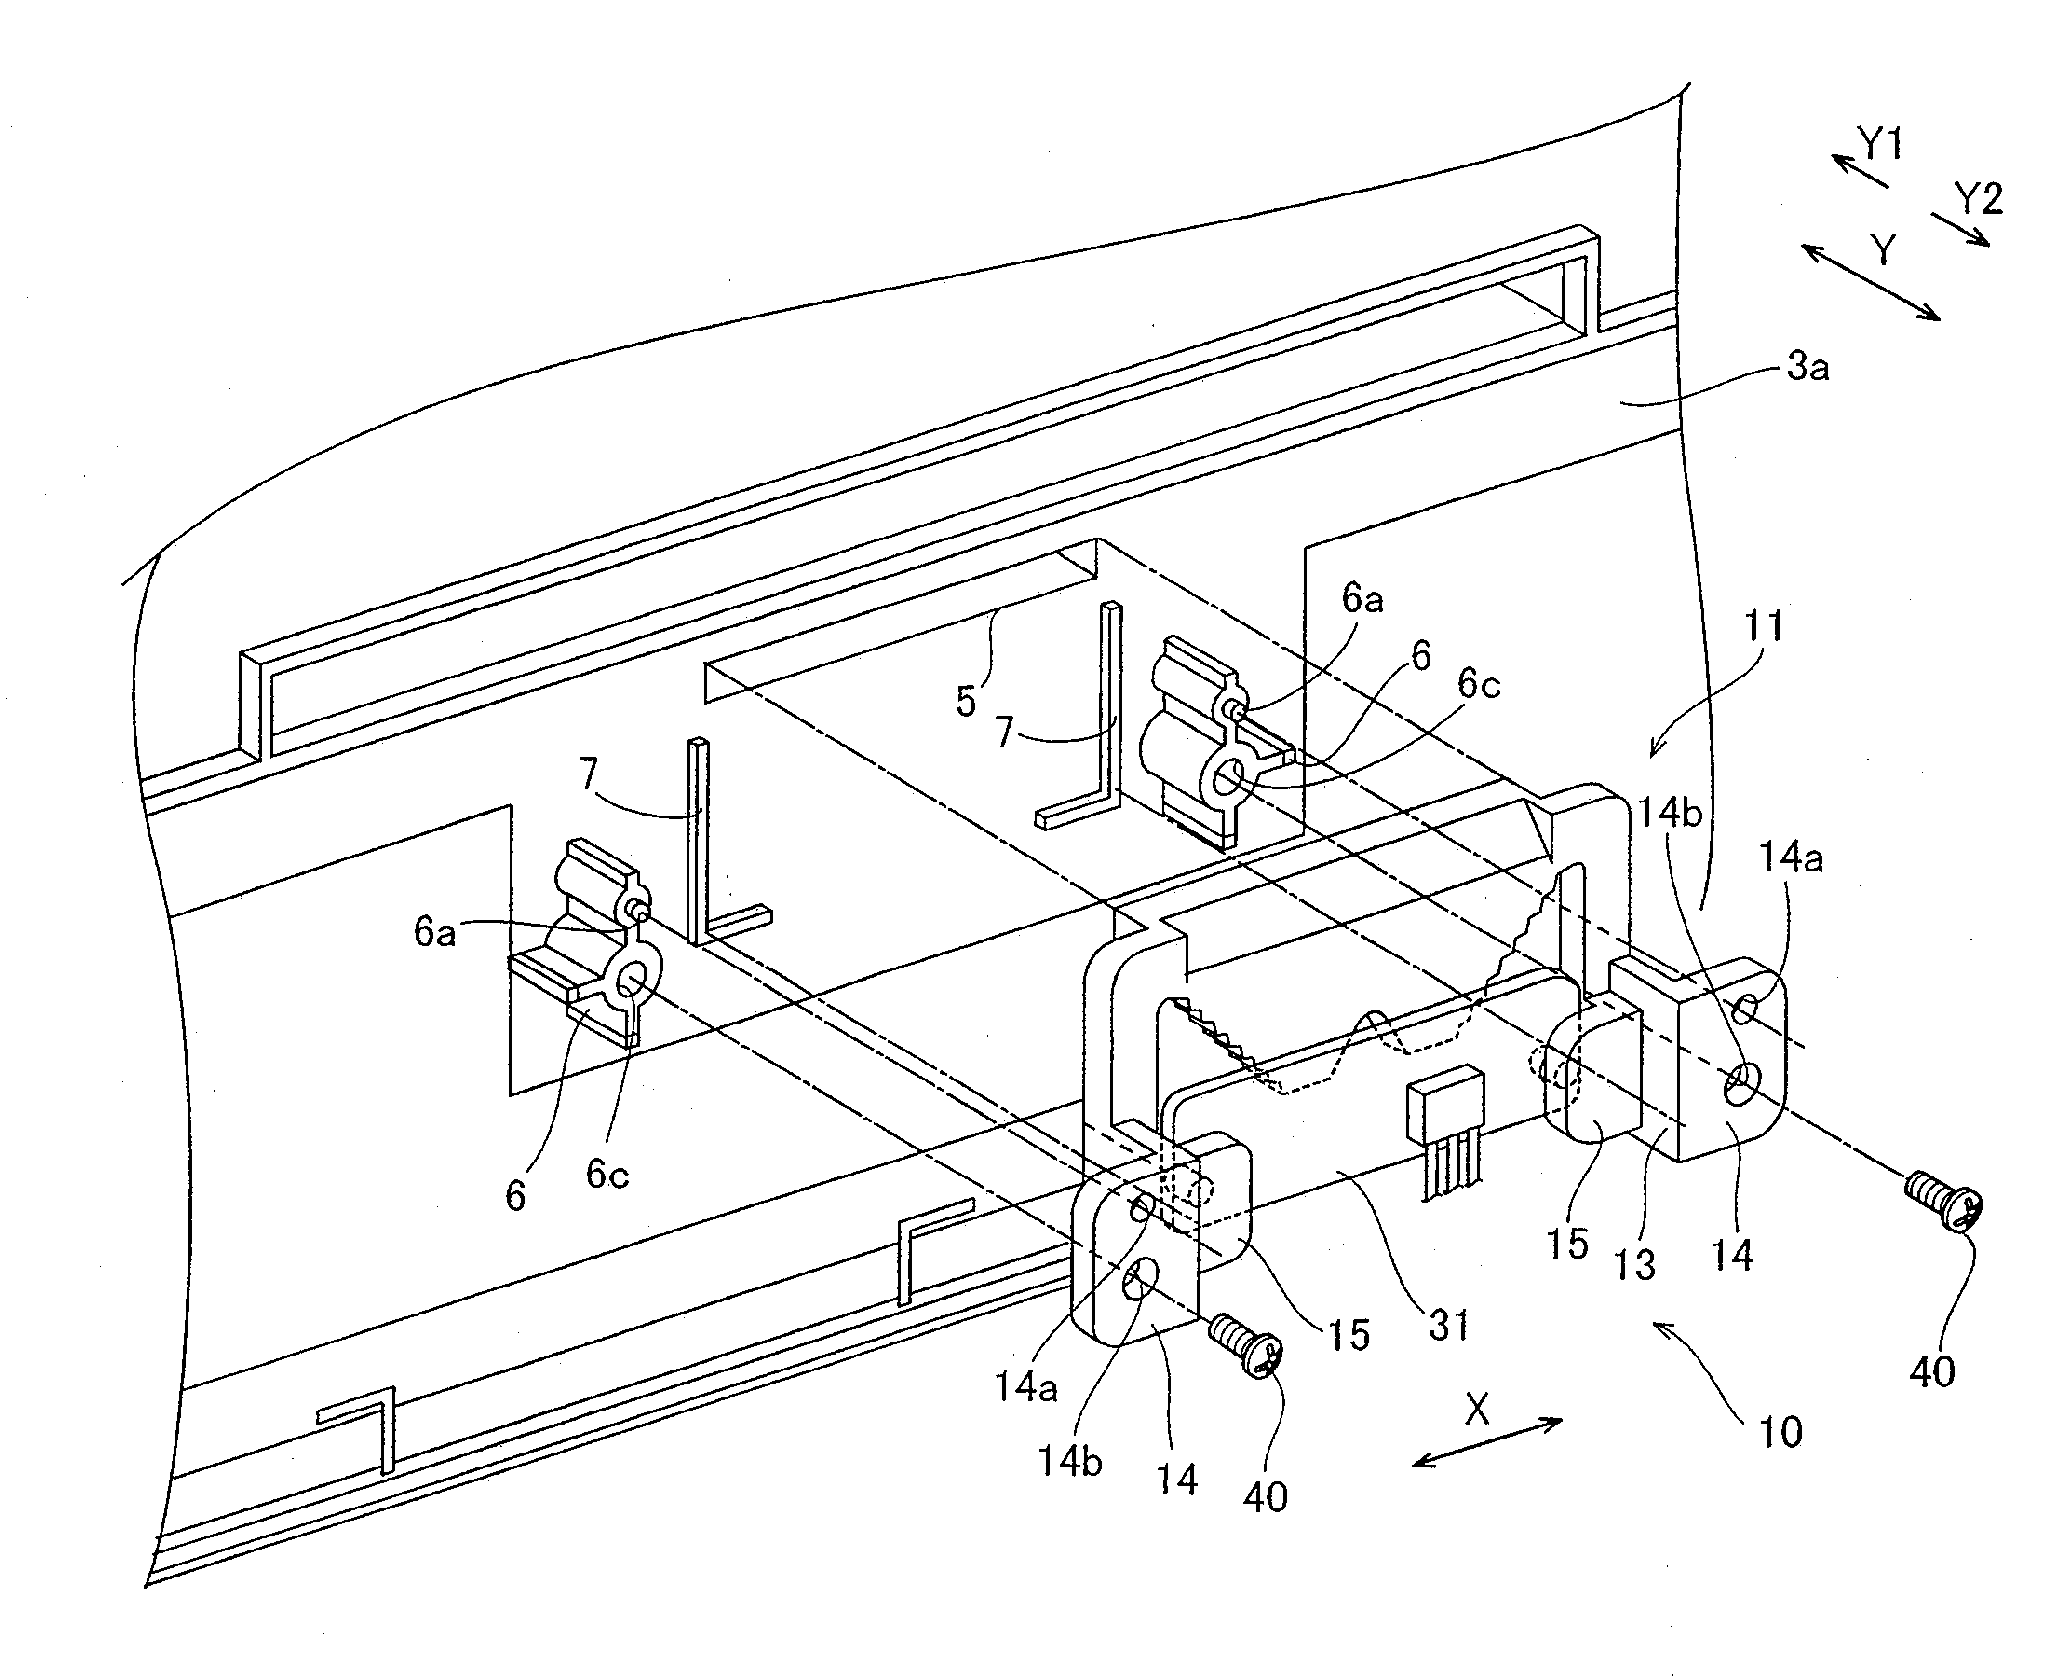 Structure for Mounting Indicator Unit on Electronic Apparatus